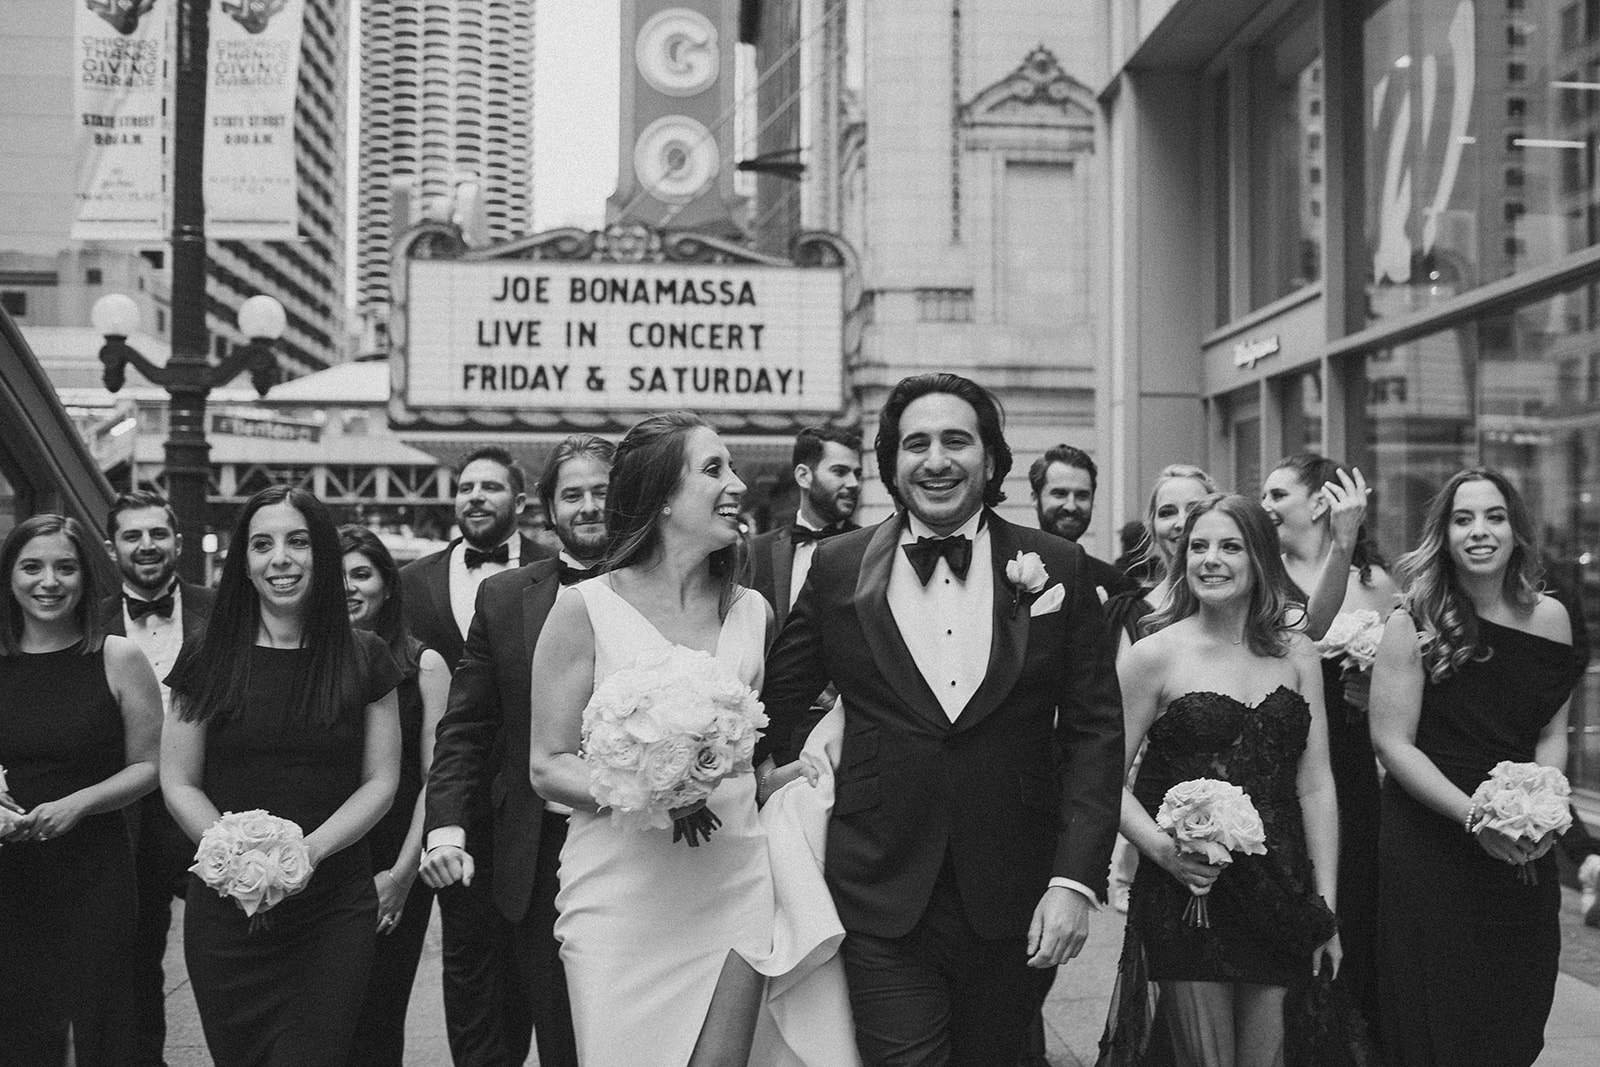 Wedding party hangs out in downtown Chicago by the Chicago Theatre